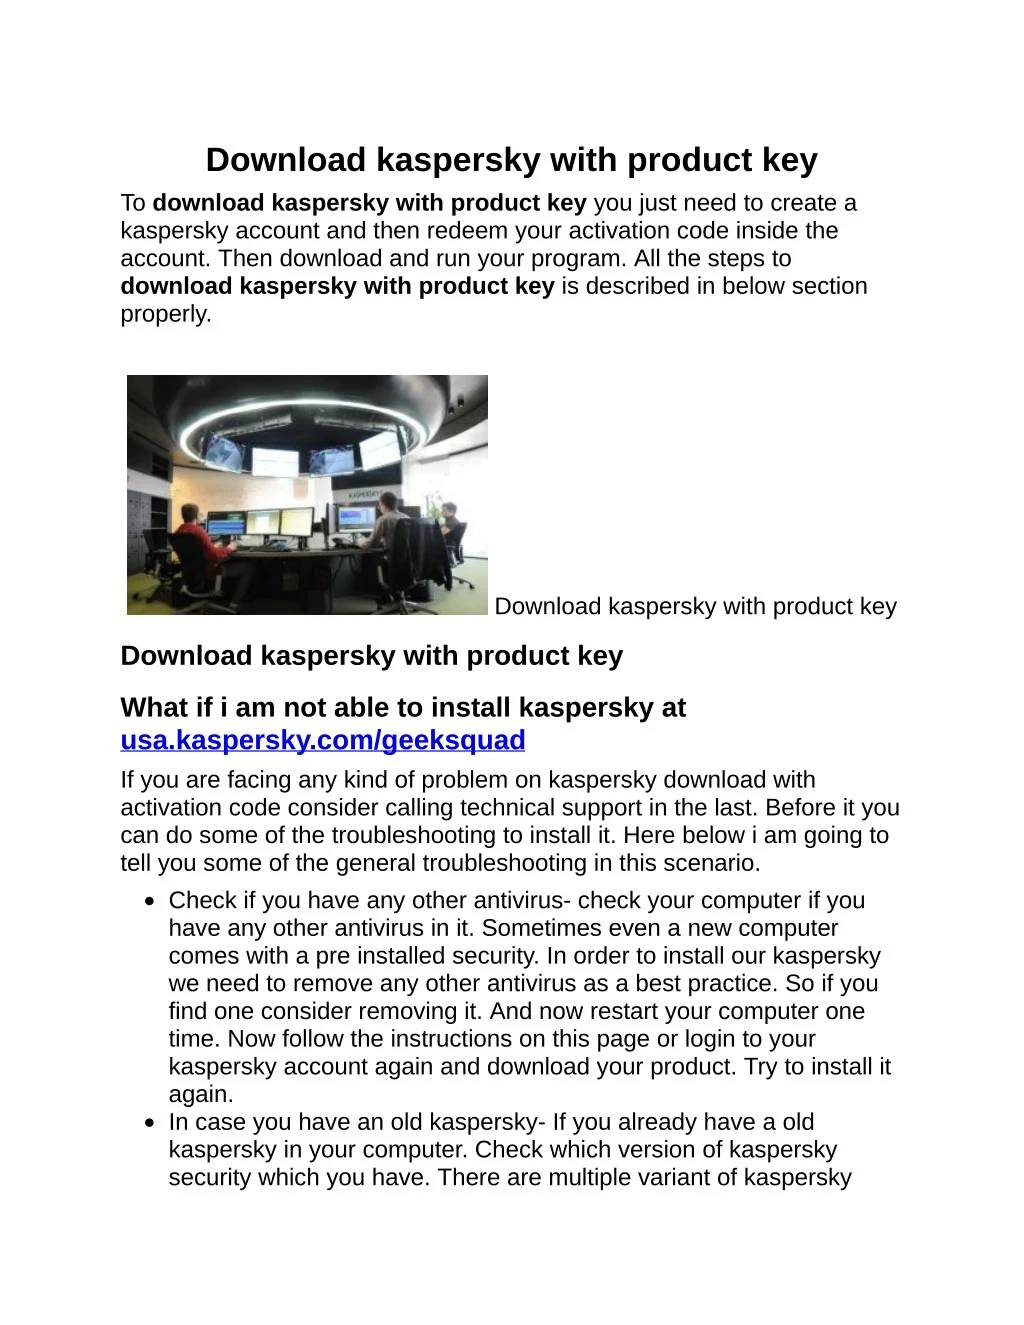 downloadkasperskywithproductkey